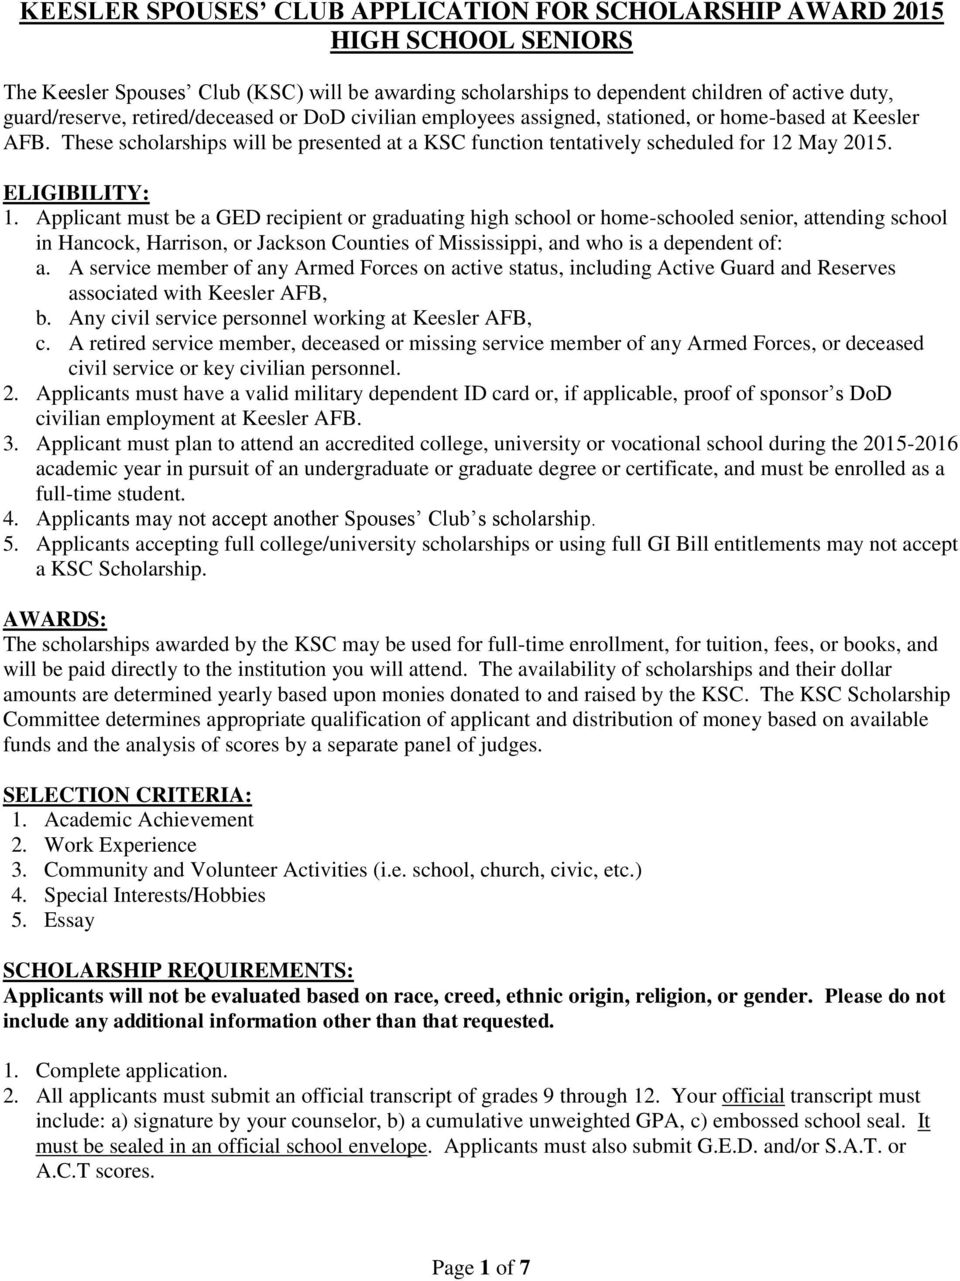 Applicant must be a GED recipient or graduating high school or home-schooled senior, attending school in Hancock, Harrison, or Jackson Counties of Mississippi, and who is a dependent of: a.